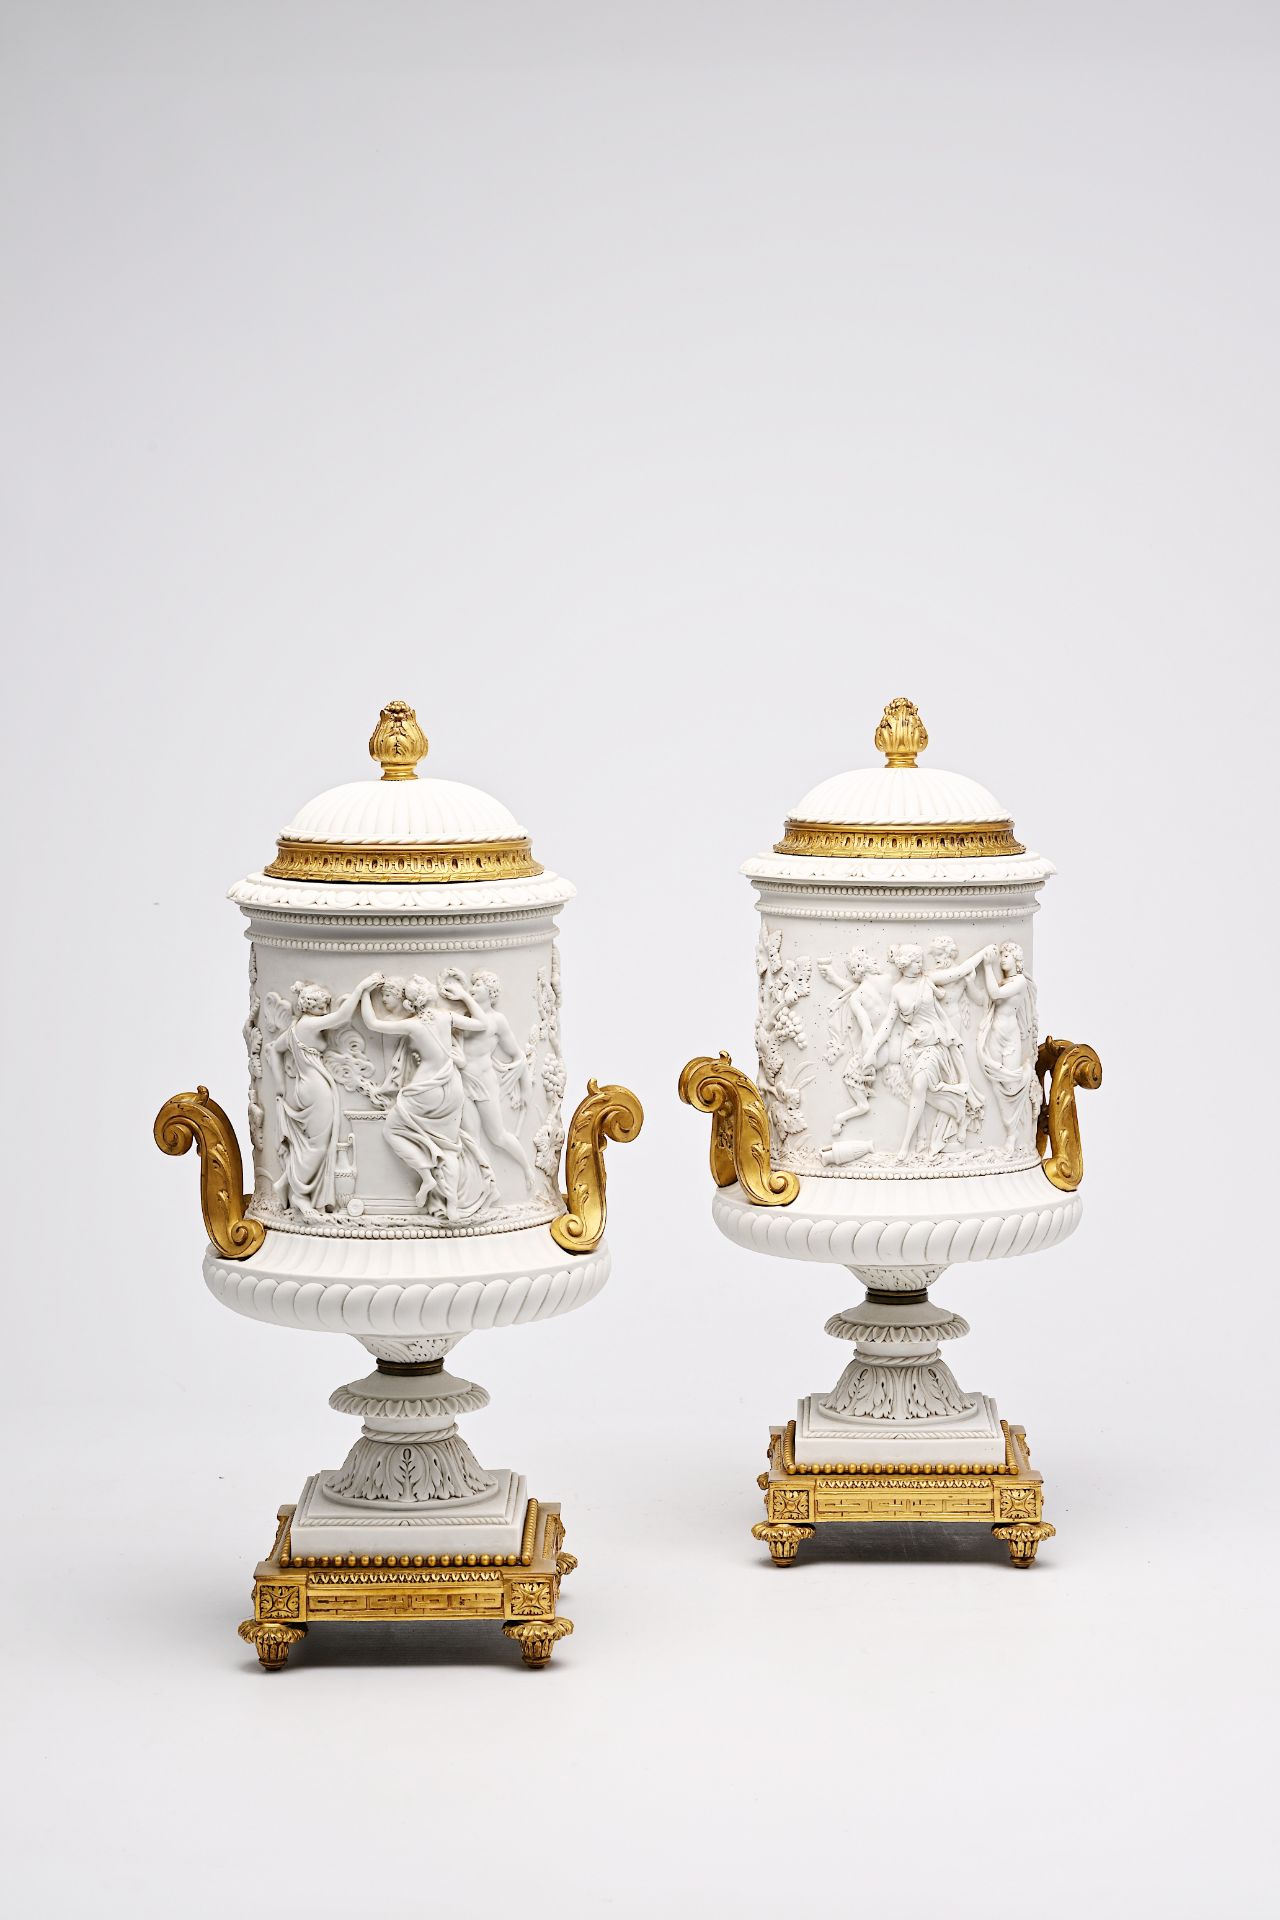 A pair of French biscuit gilt bronze mounted vases and covers with a frieze with bacchantes, Sevres - Image 11 of 14